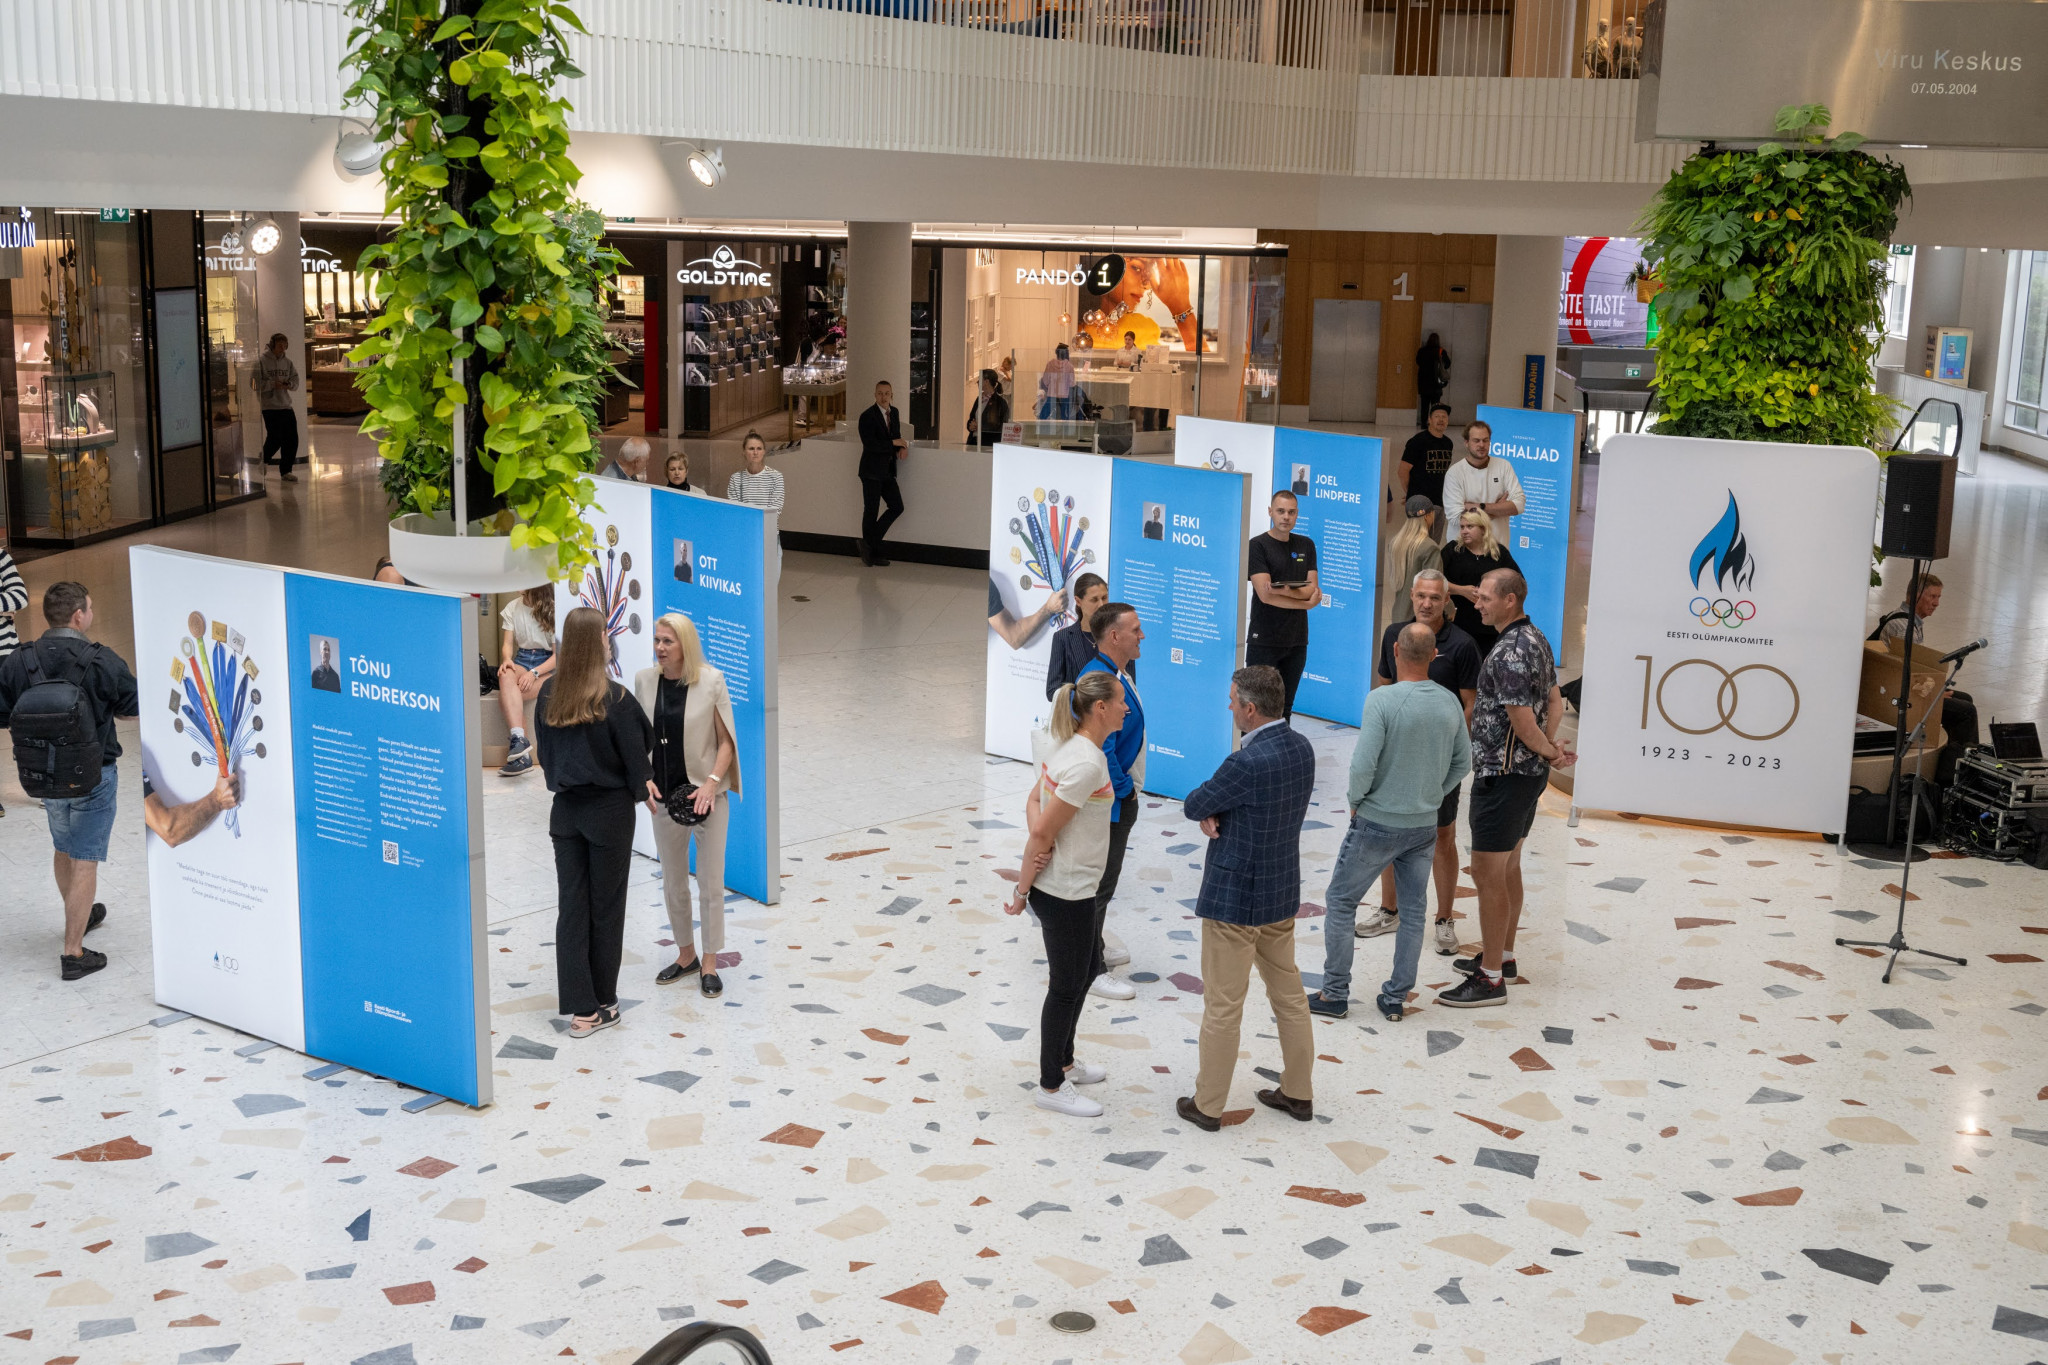 The exhibition is on display at the Viru Keskus retail complex in Tallinn until September 17, before it is set to move to the Estonian Sports and Olympic Museum in Tartu ©EOK